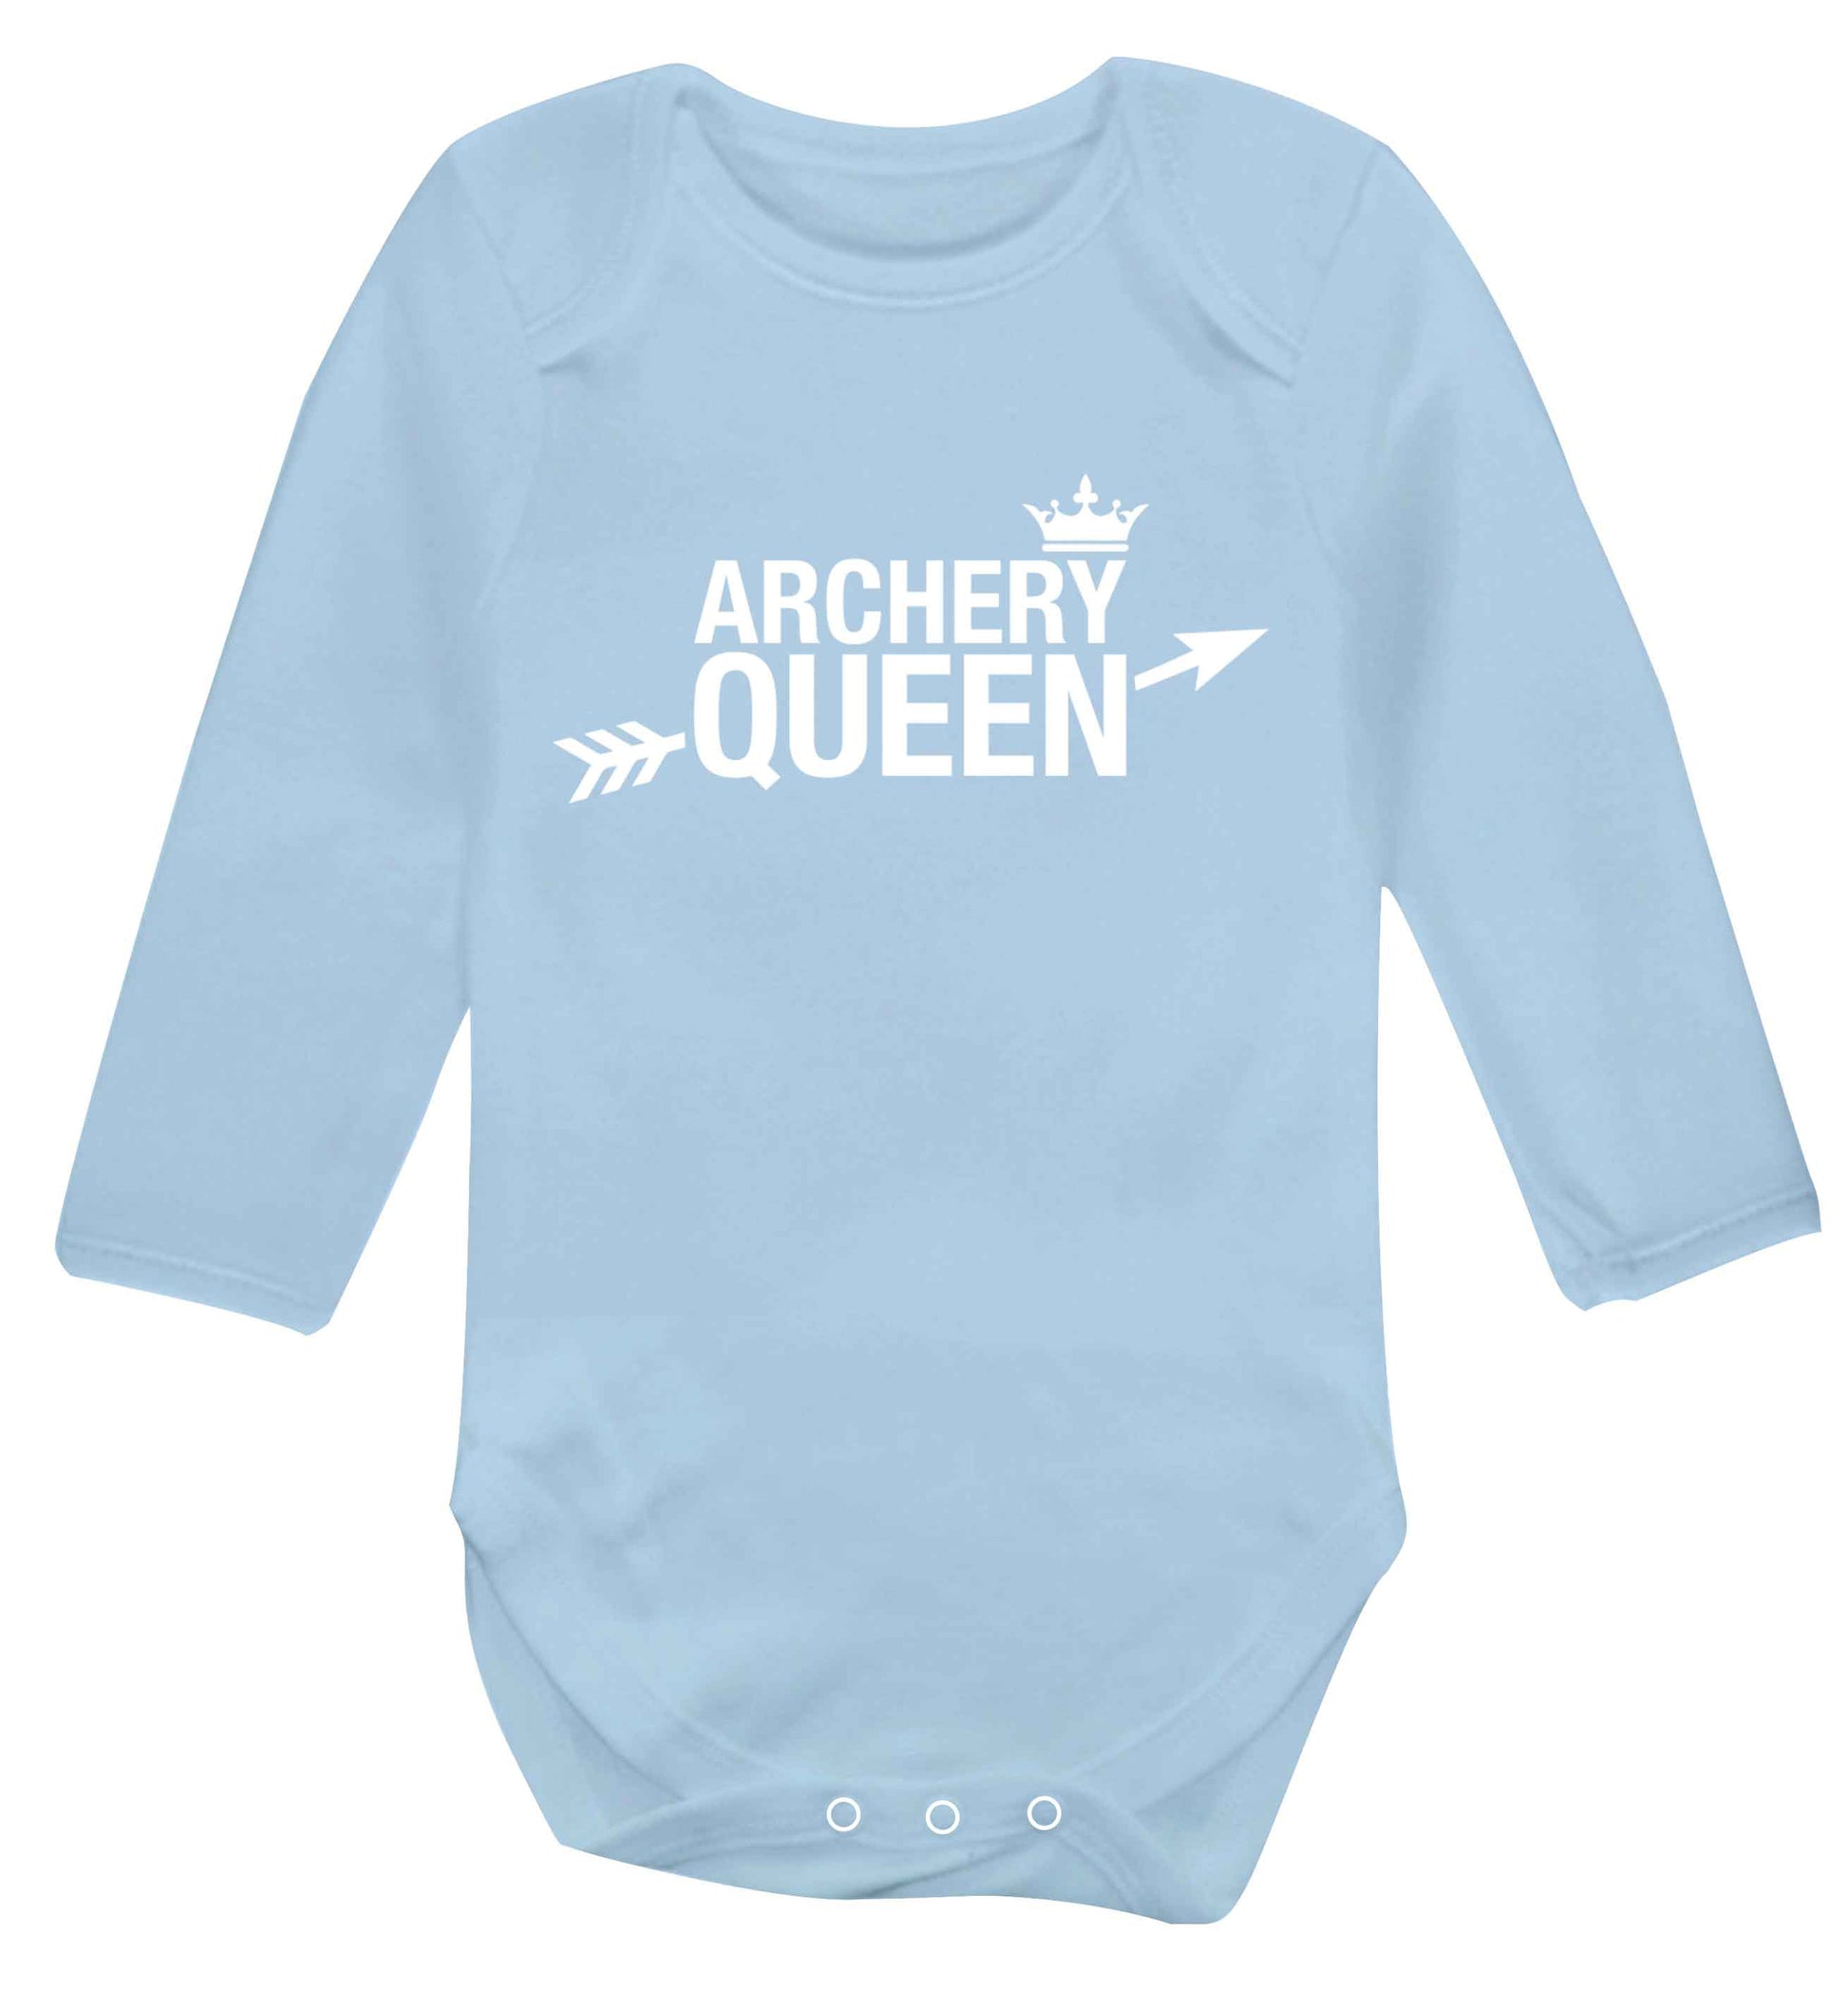 Archery queen Baby Vest long sleeved pale blue 6-12 months